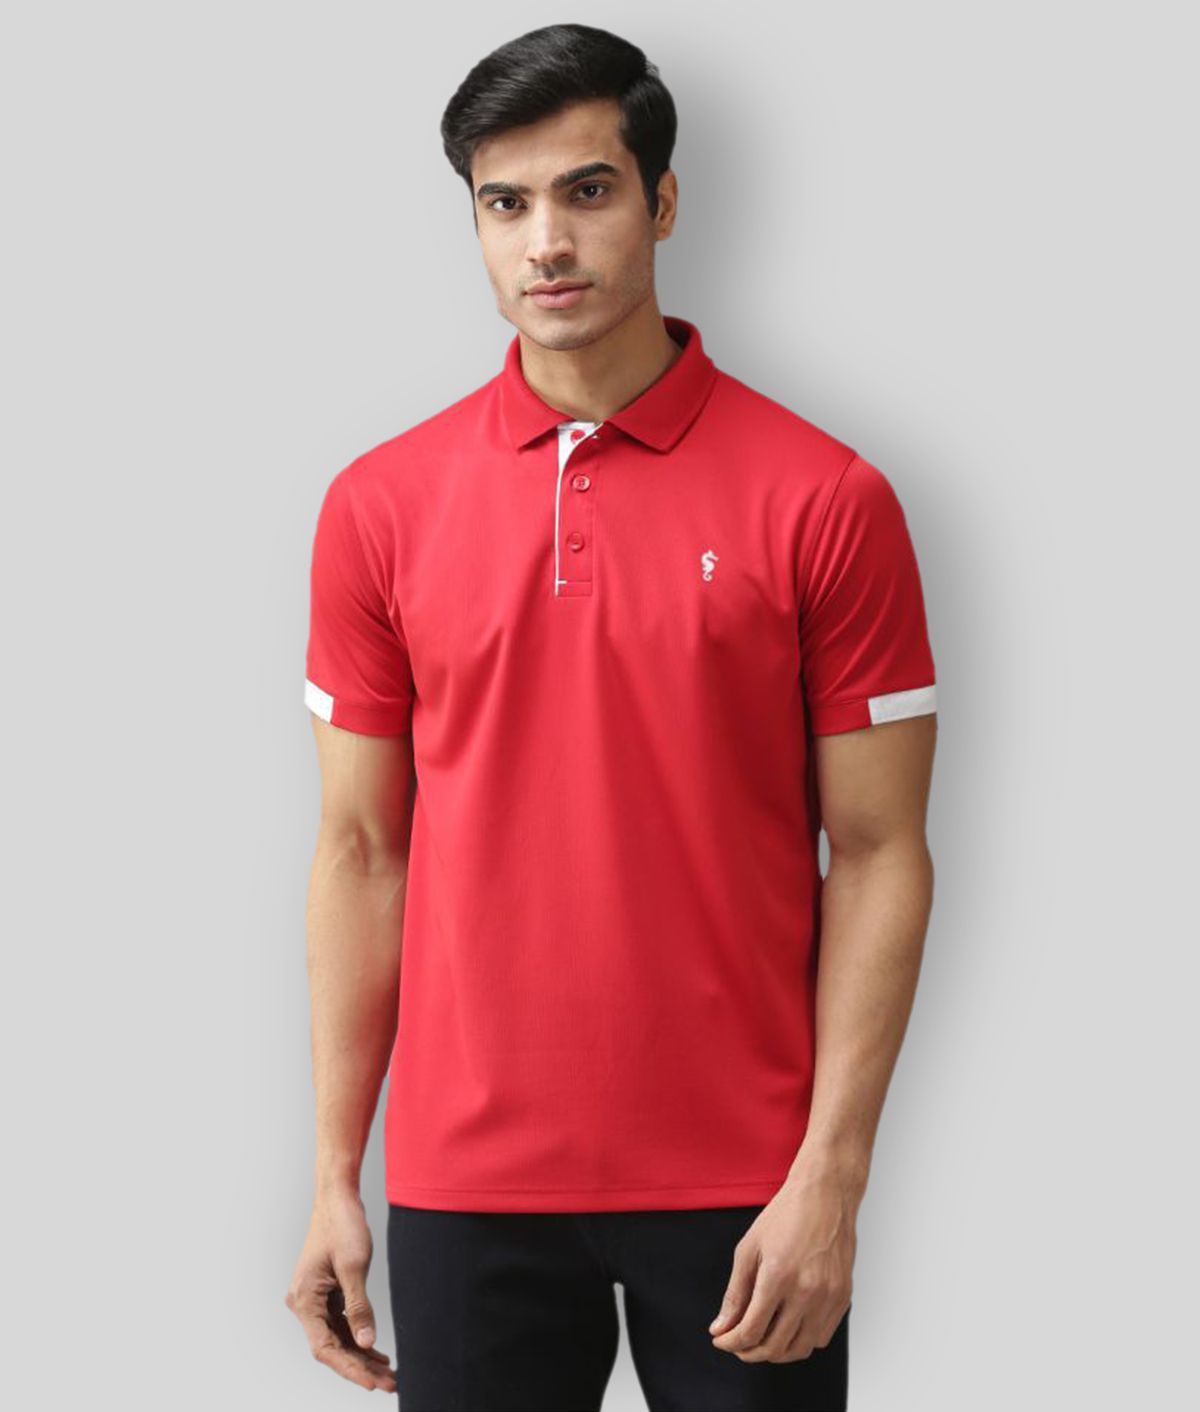 EPPE - Red Cotton Regular Fit Men's Sports Polo T-Shirt ( Pack of 1 )